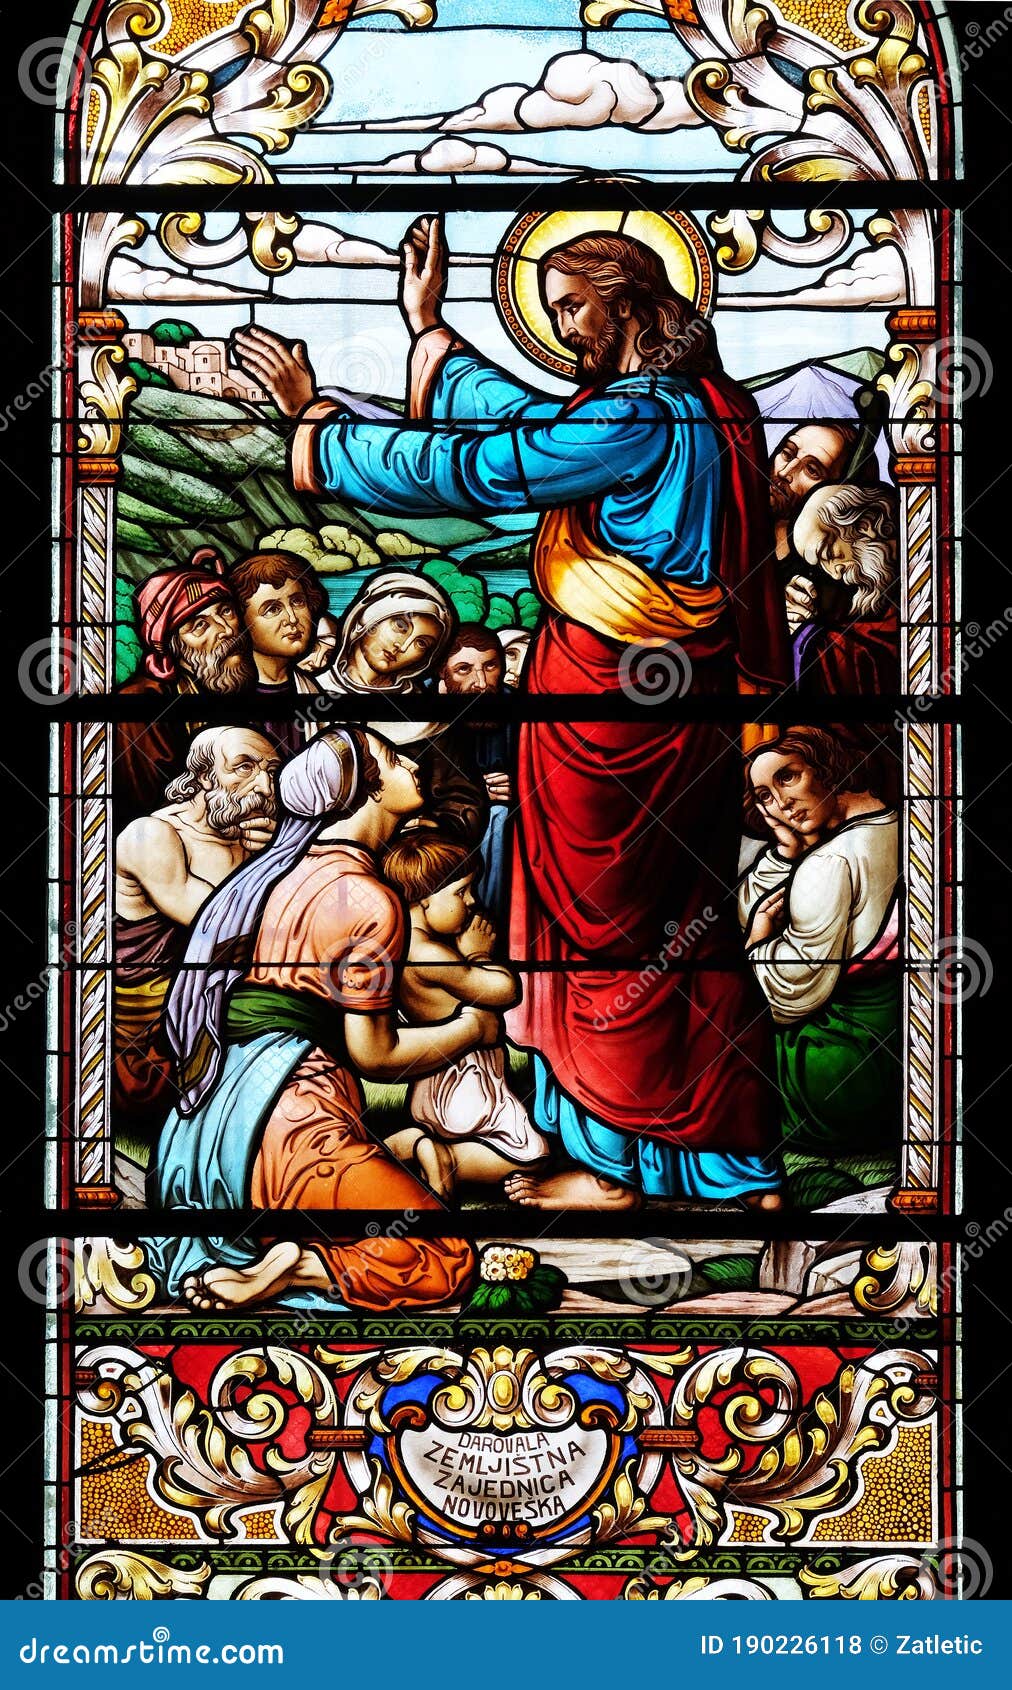 sermon on the mount, stained glass window in the st john the baptist church in zagreb, croatia